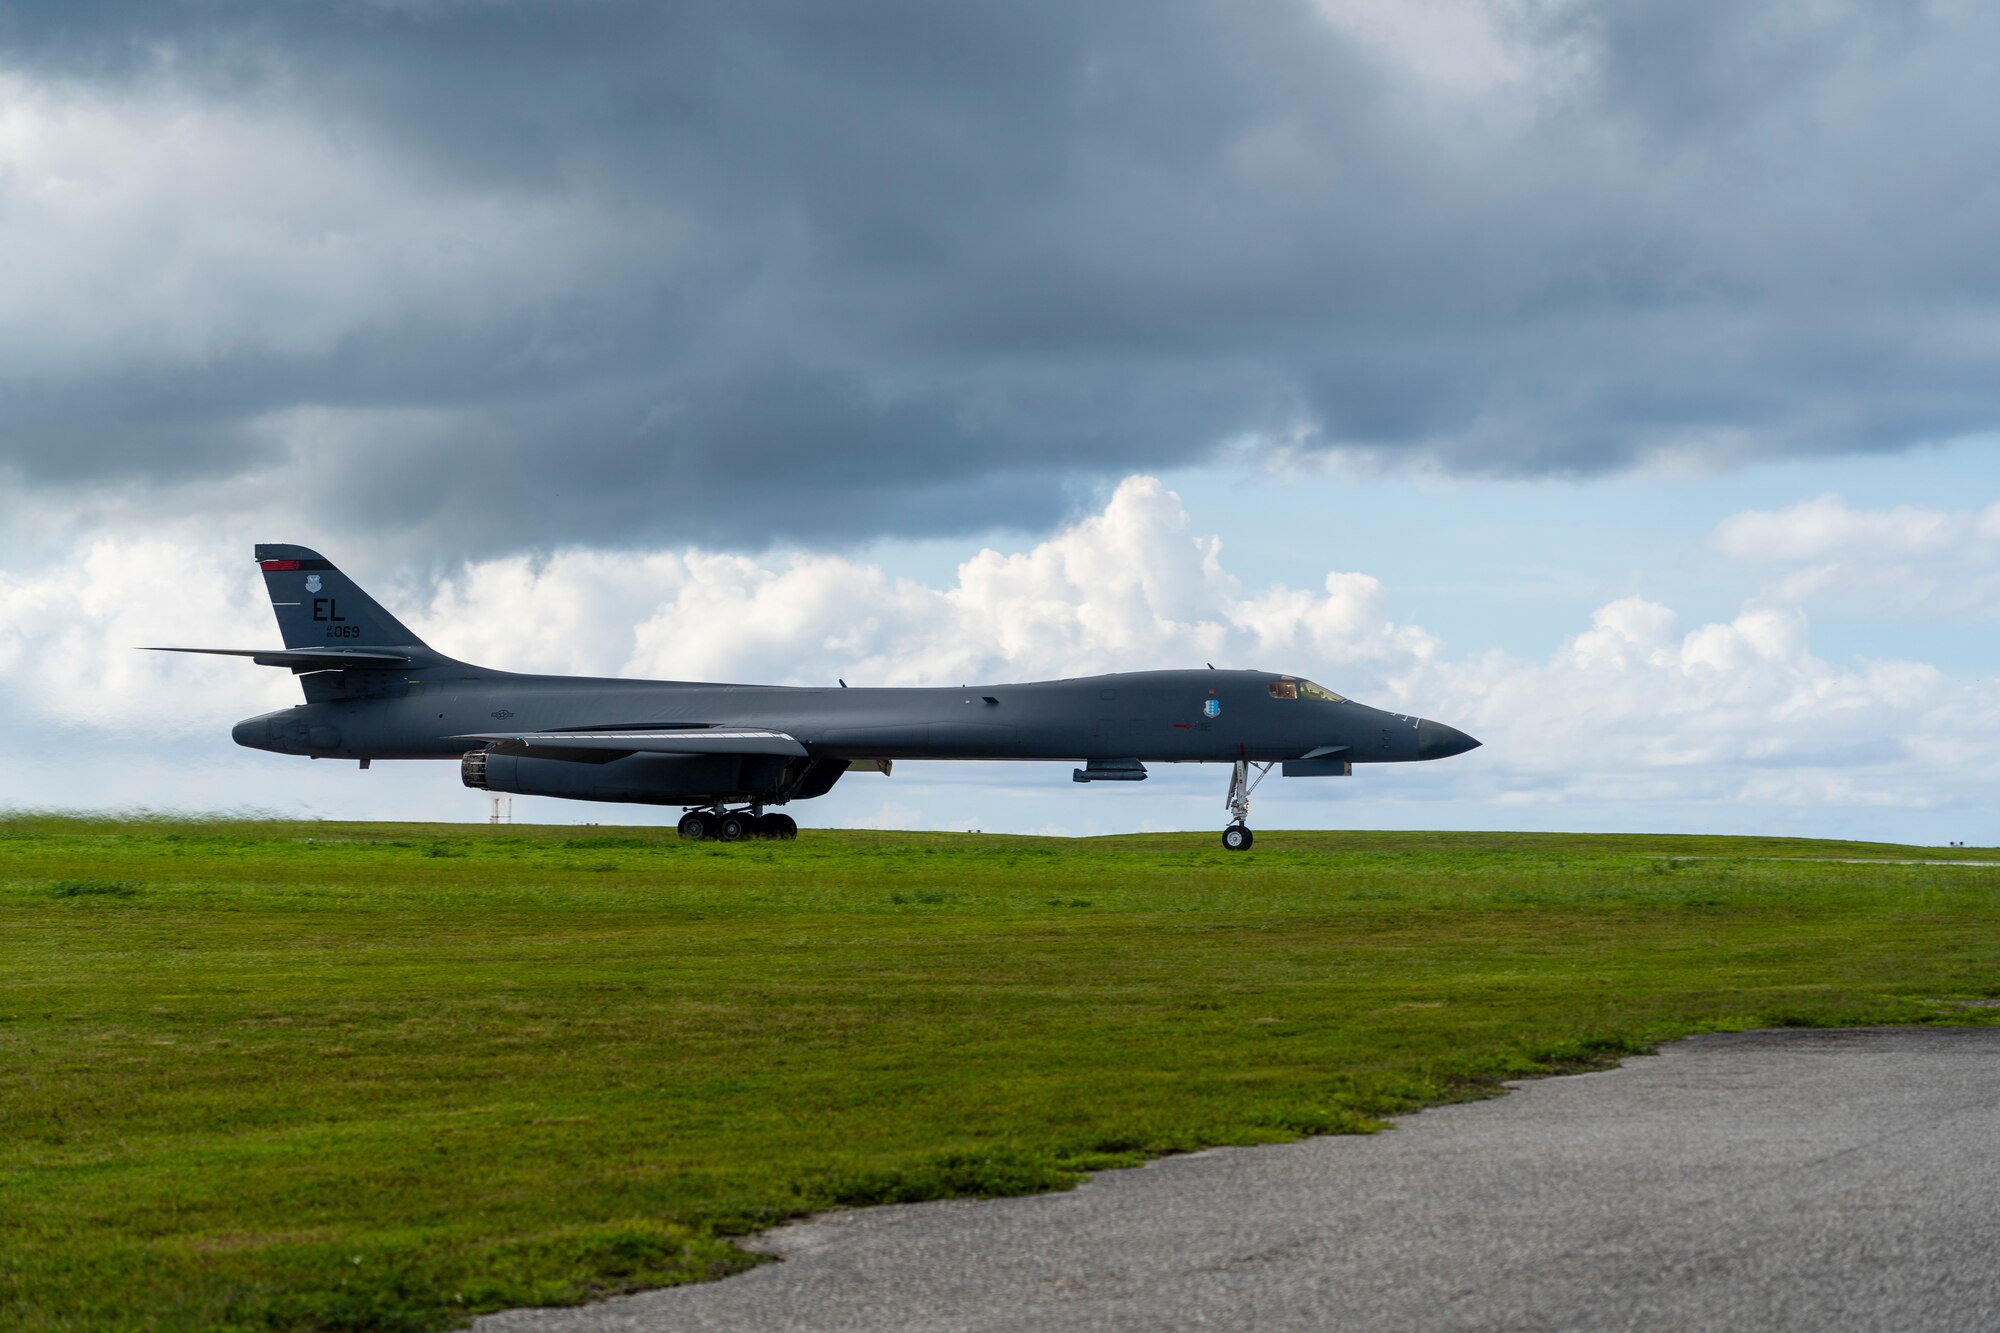 A B-1B Lancer assigned to the 28th Bomb Wing, Ellsworth Air Force Base, S.D., sits on the flightline at Andersen AFB, Guam, Sept. 23, 2020. The U.S. military frequently conducts joint training to refine operational proficiency, improve contingency response abilities and promote stability and security throughout the Indo-Pacific region.  (U.S. Air Force photo by Staff Sgt. Nicolas Z. Erwin)